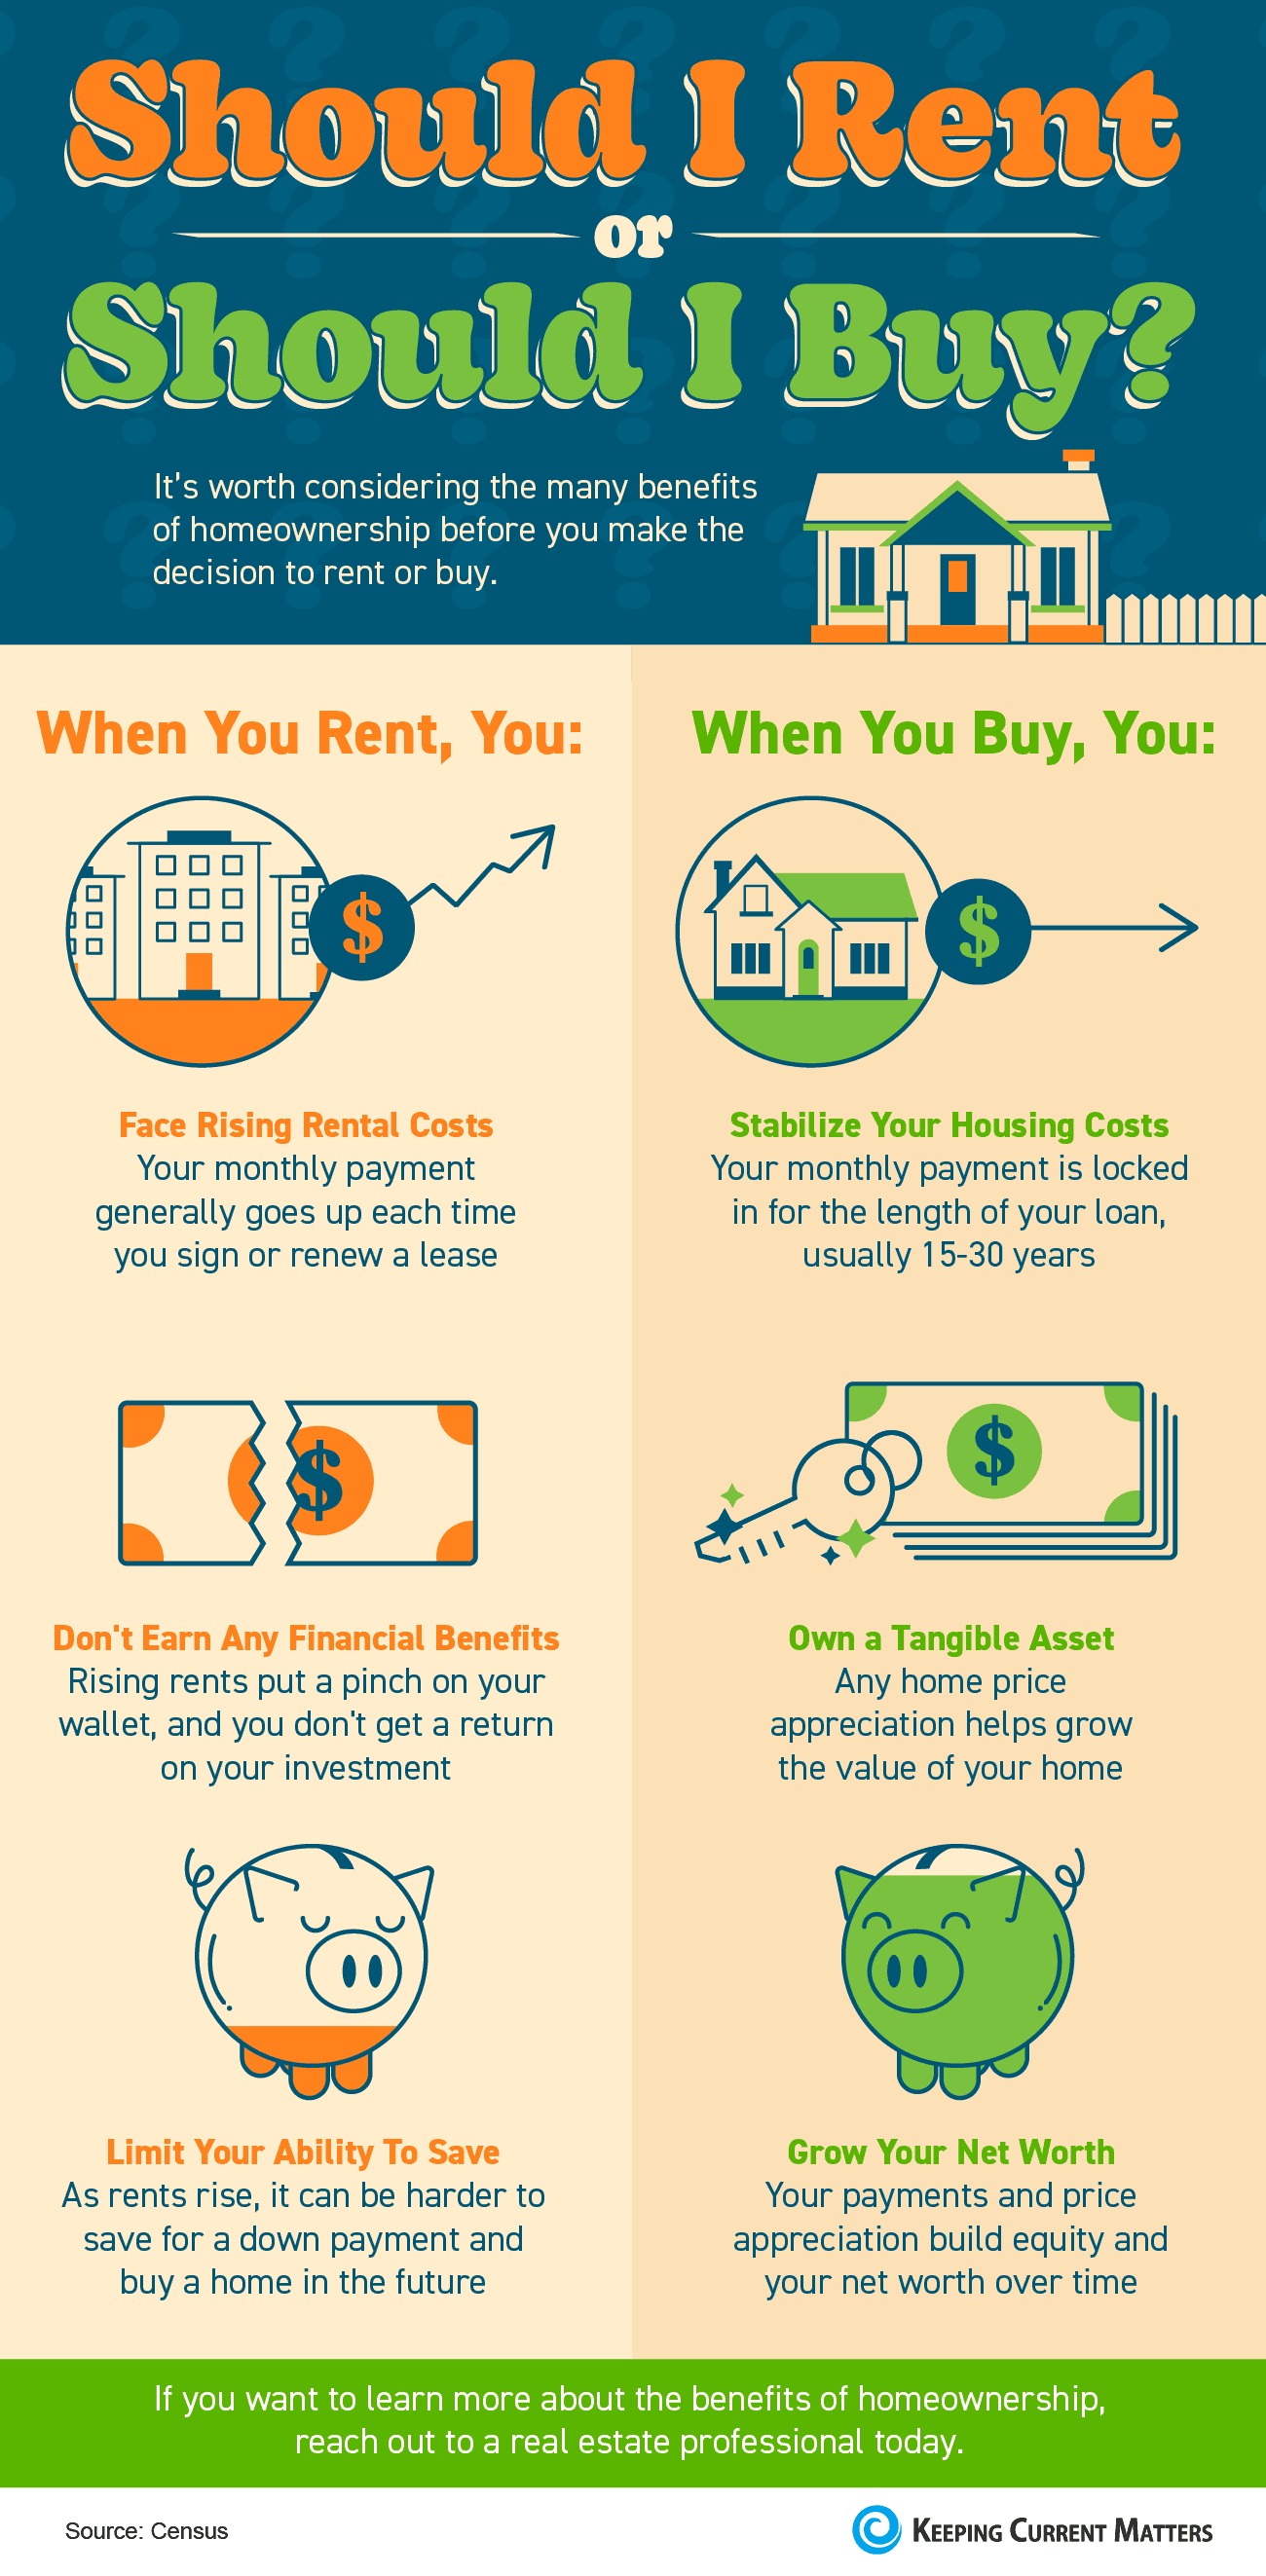 Should I Rent or Should I Buy? [INFOGRAPHIC] | Keeping Current Matters